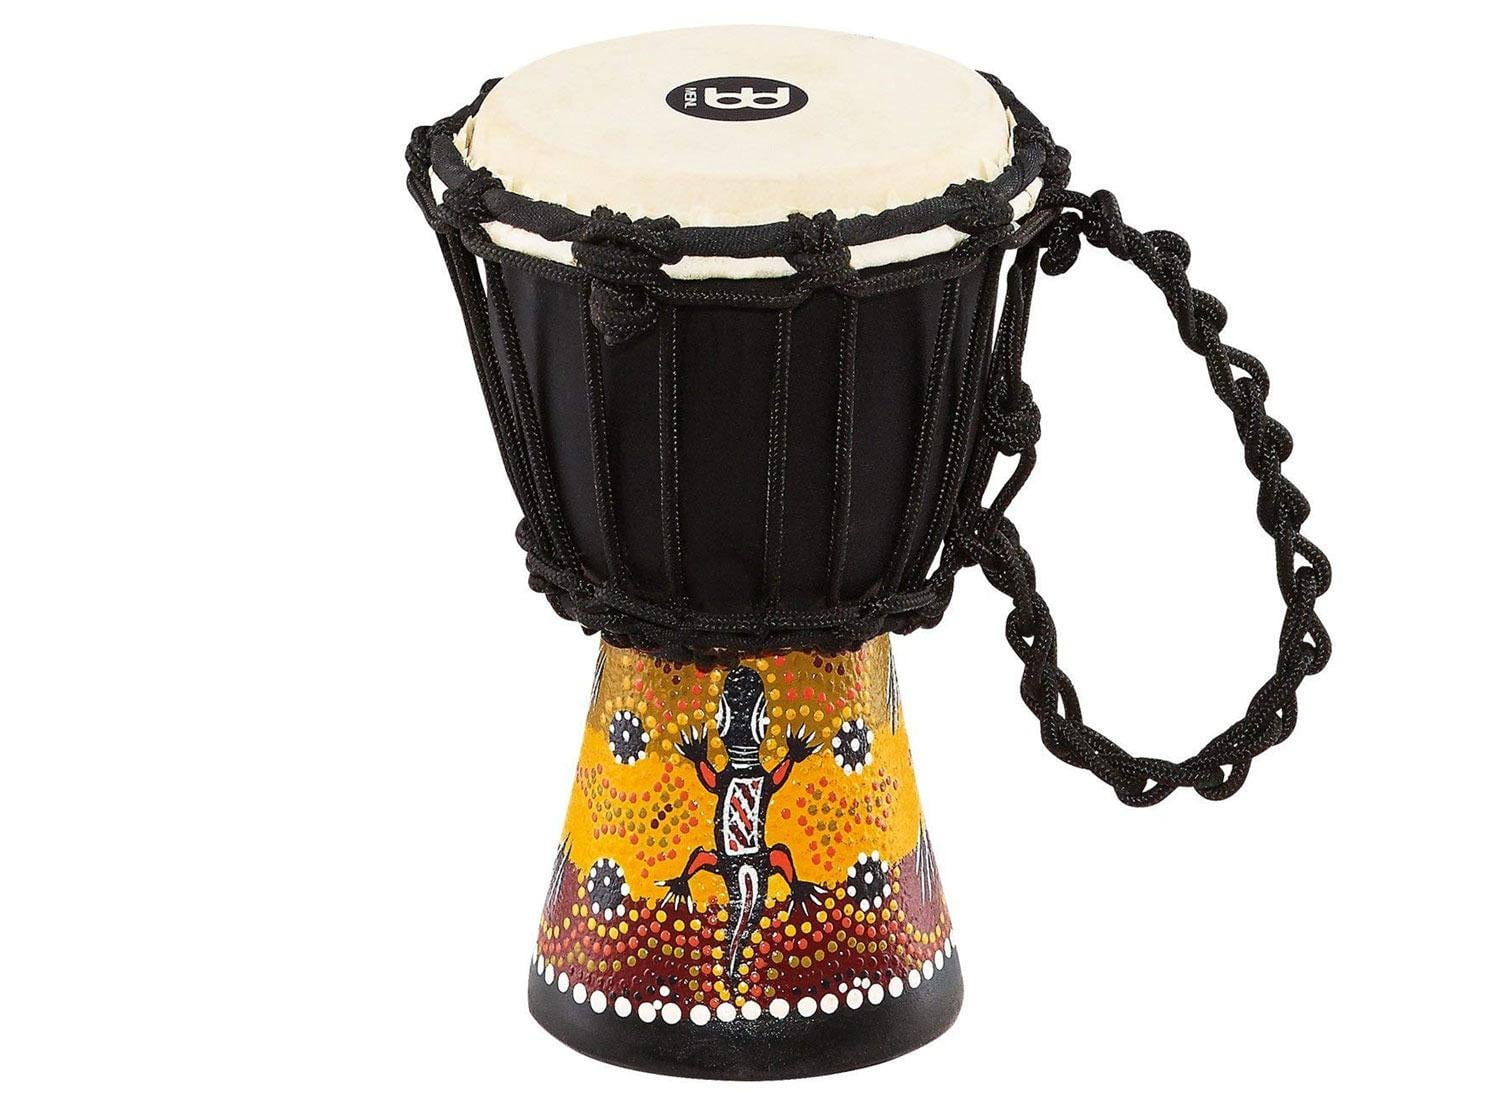 X8 Drums & Percussion Mini Djembe Drum with Gecko Painted Design 